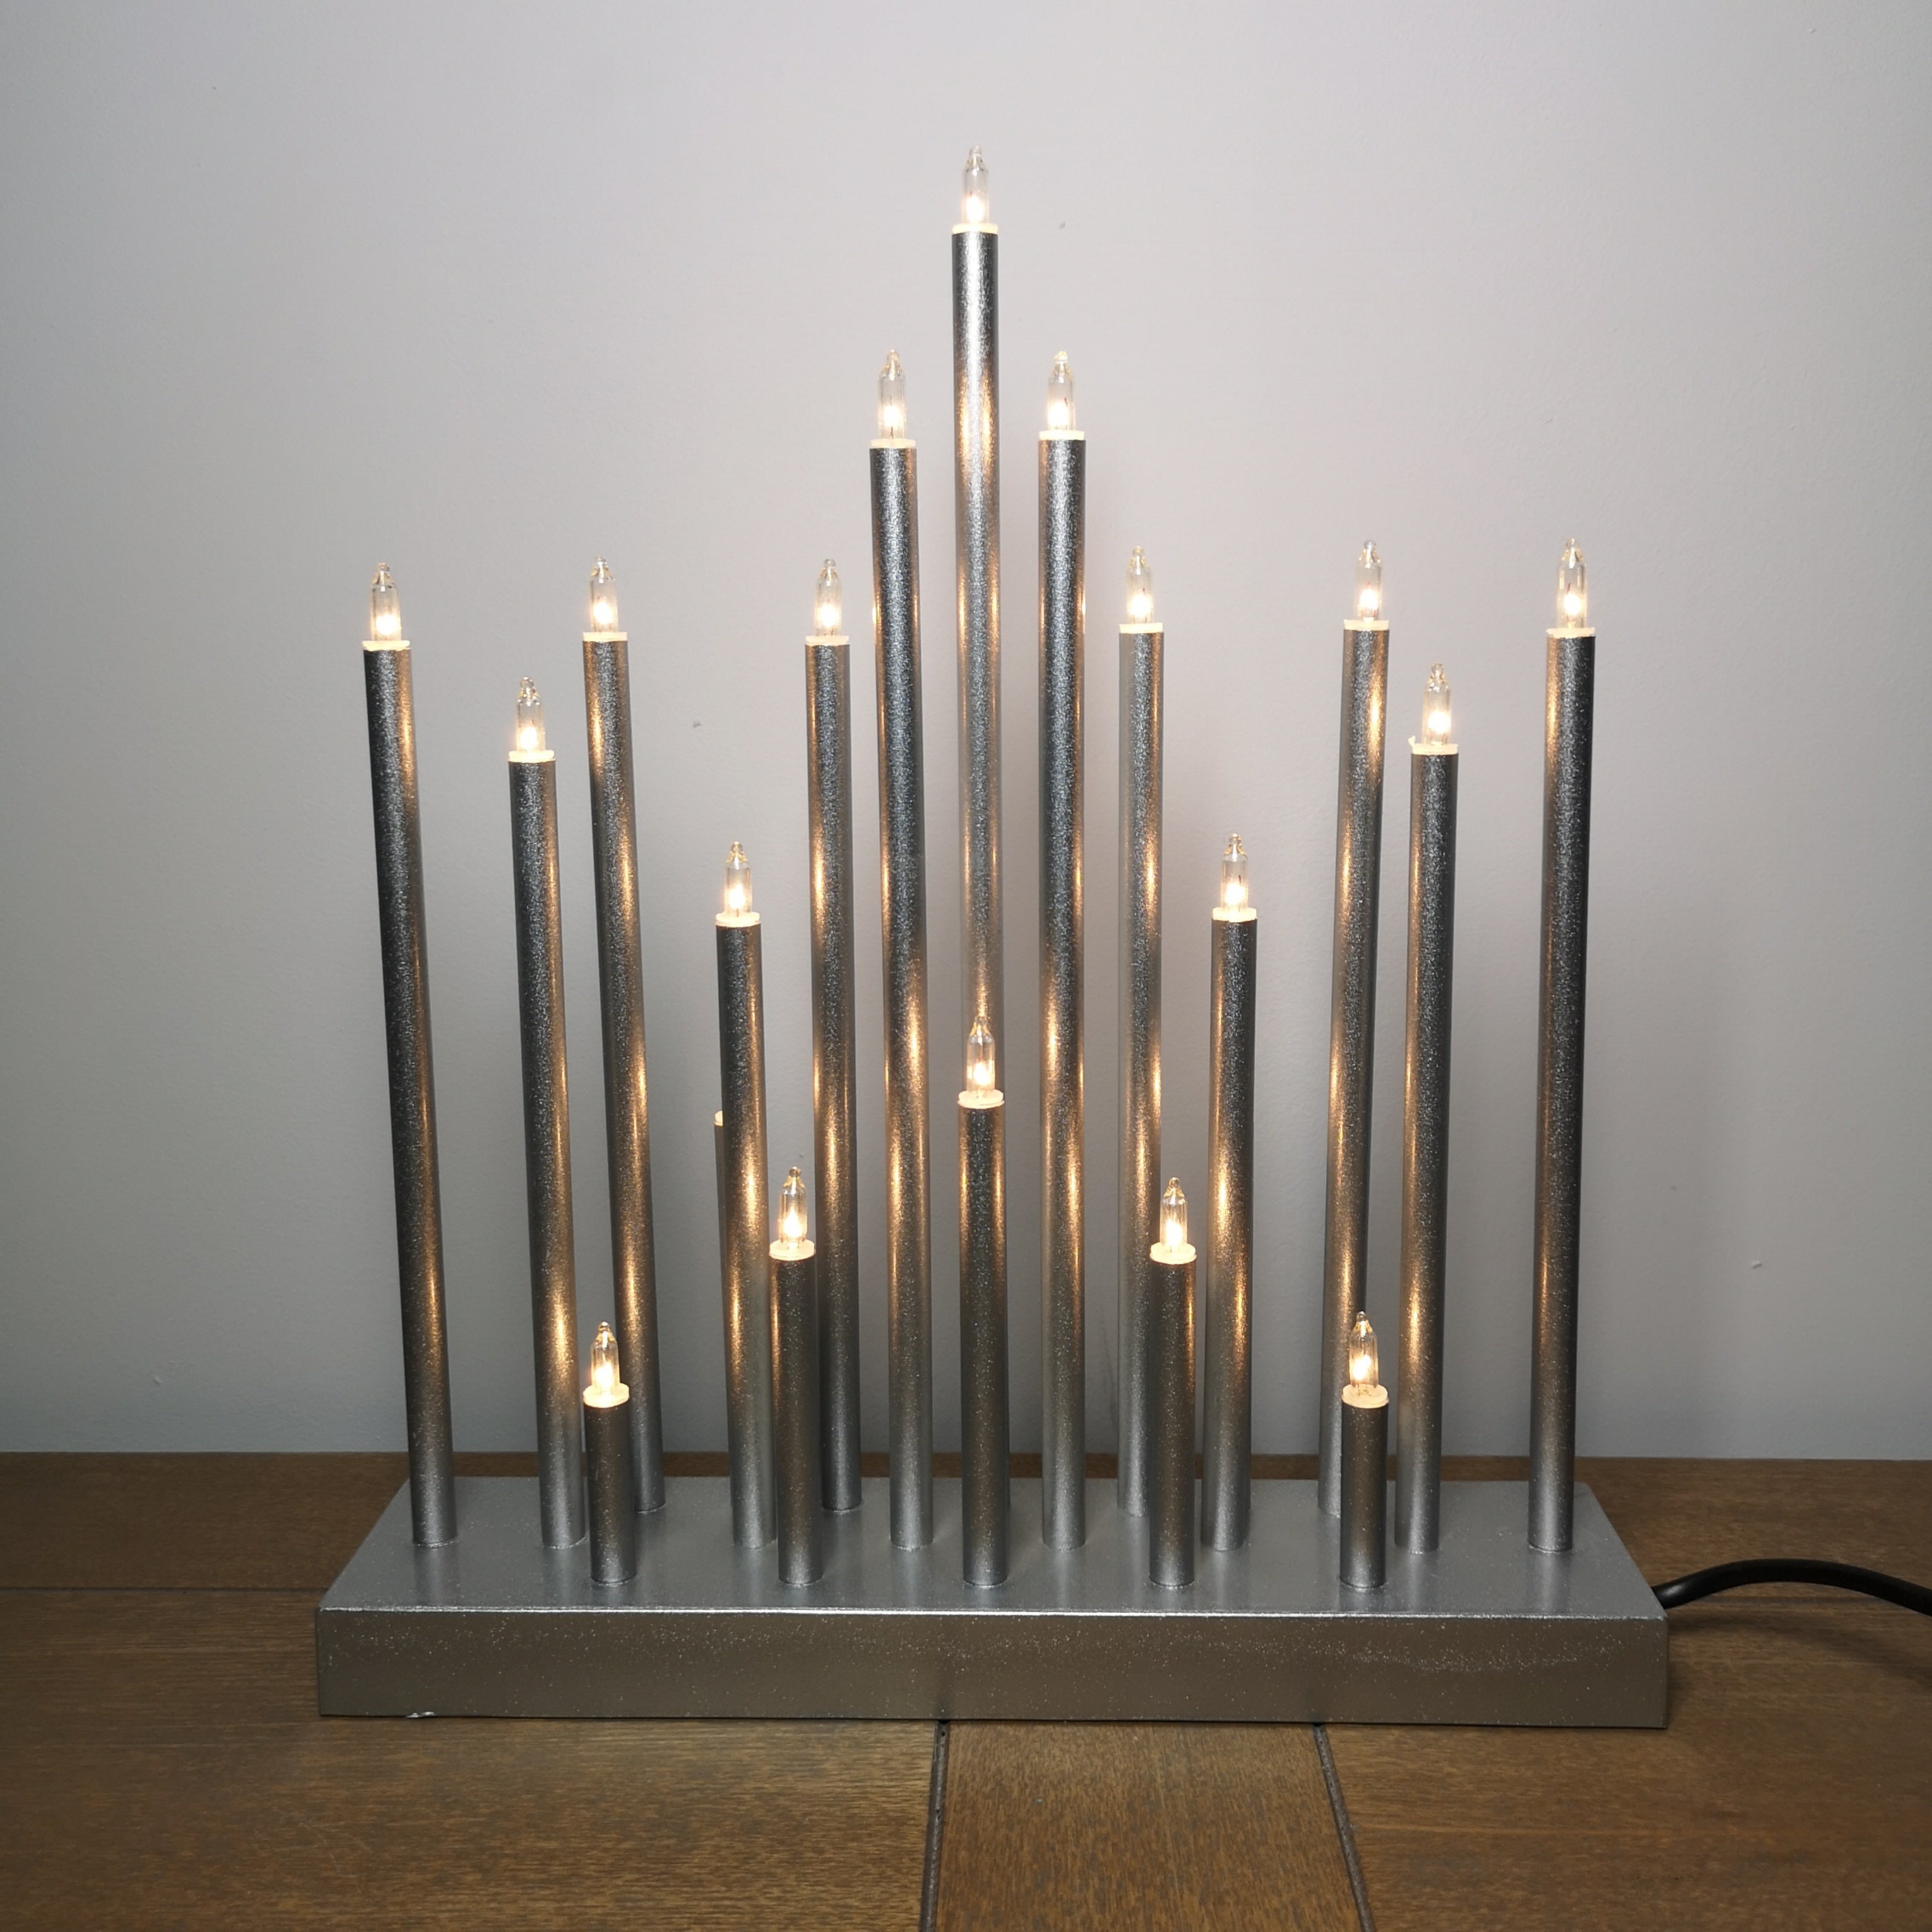 33cm Premier Christmas Candle Bridge Star Shaped with 20 LEDs In Silver Mains Power